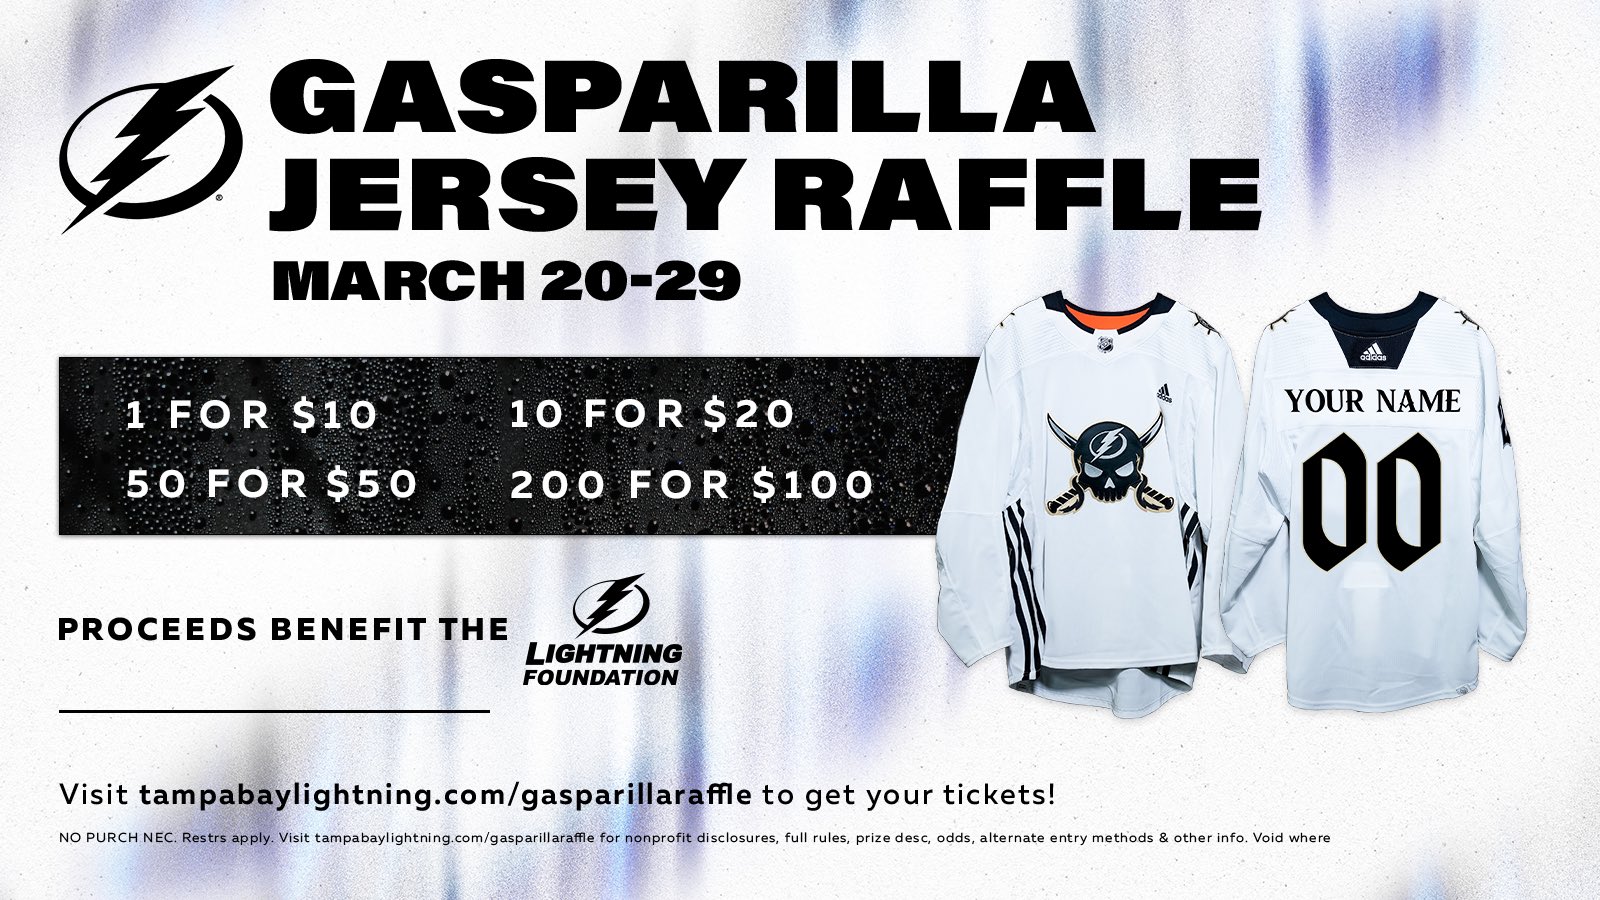 Lightning Foundation on X: We wanted to offer ye pirates one more chance  to own one of our 2023 Gasparilla warmup jerseys! 🏴‍☠️ Now thru 6pm on  3/29, we're raffling off the